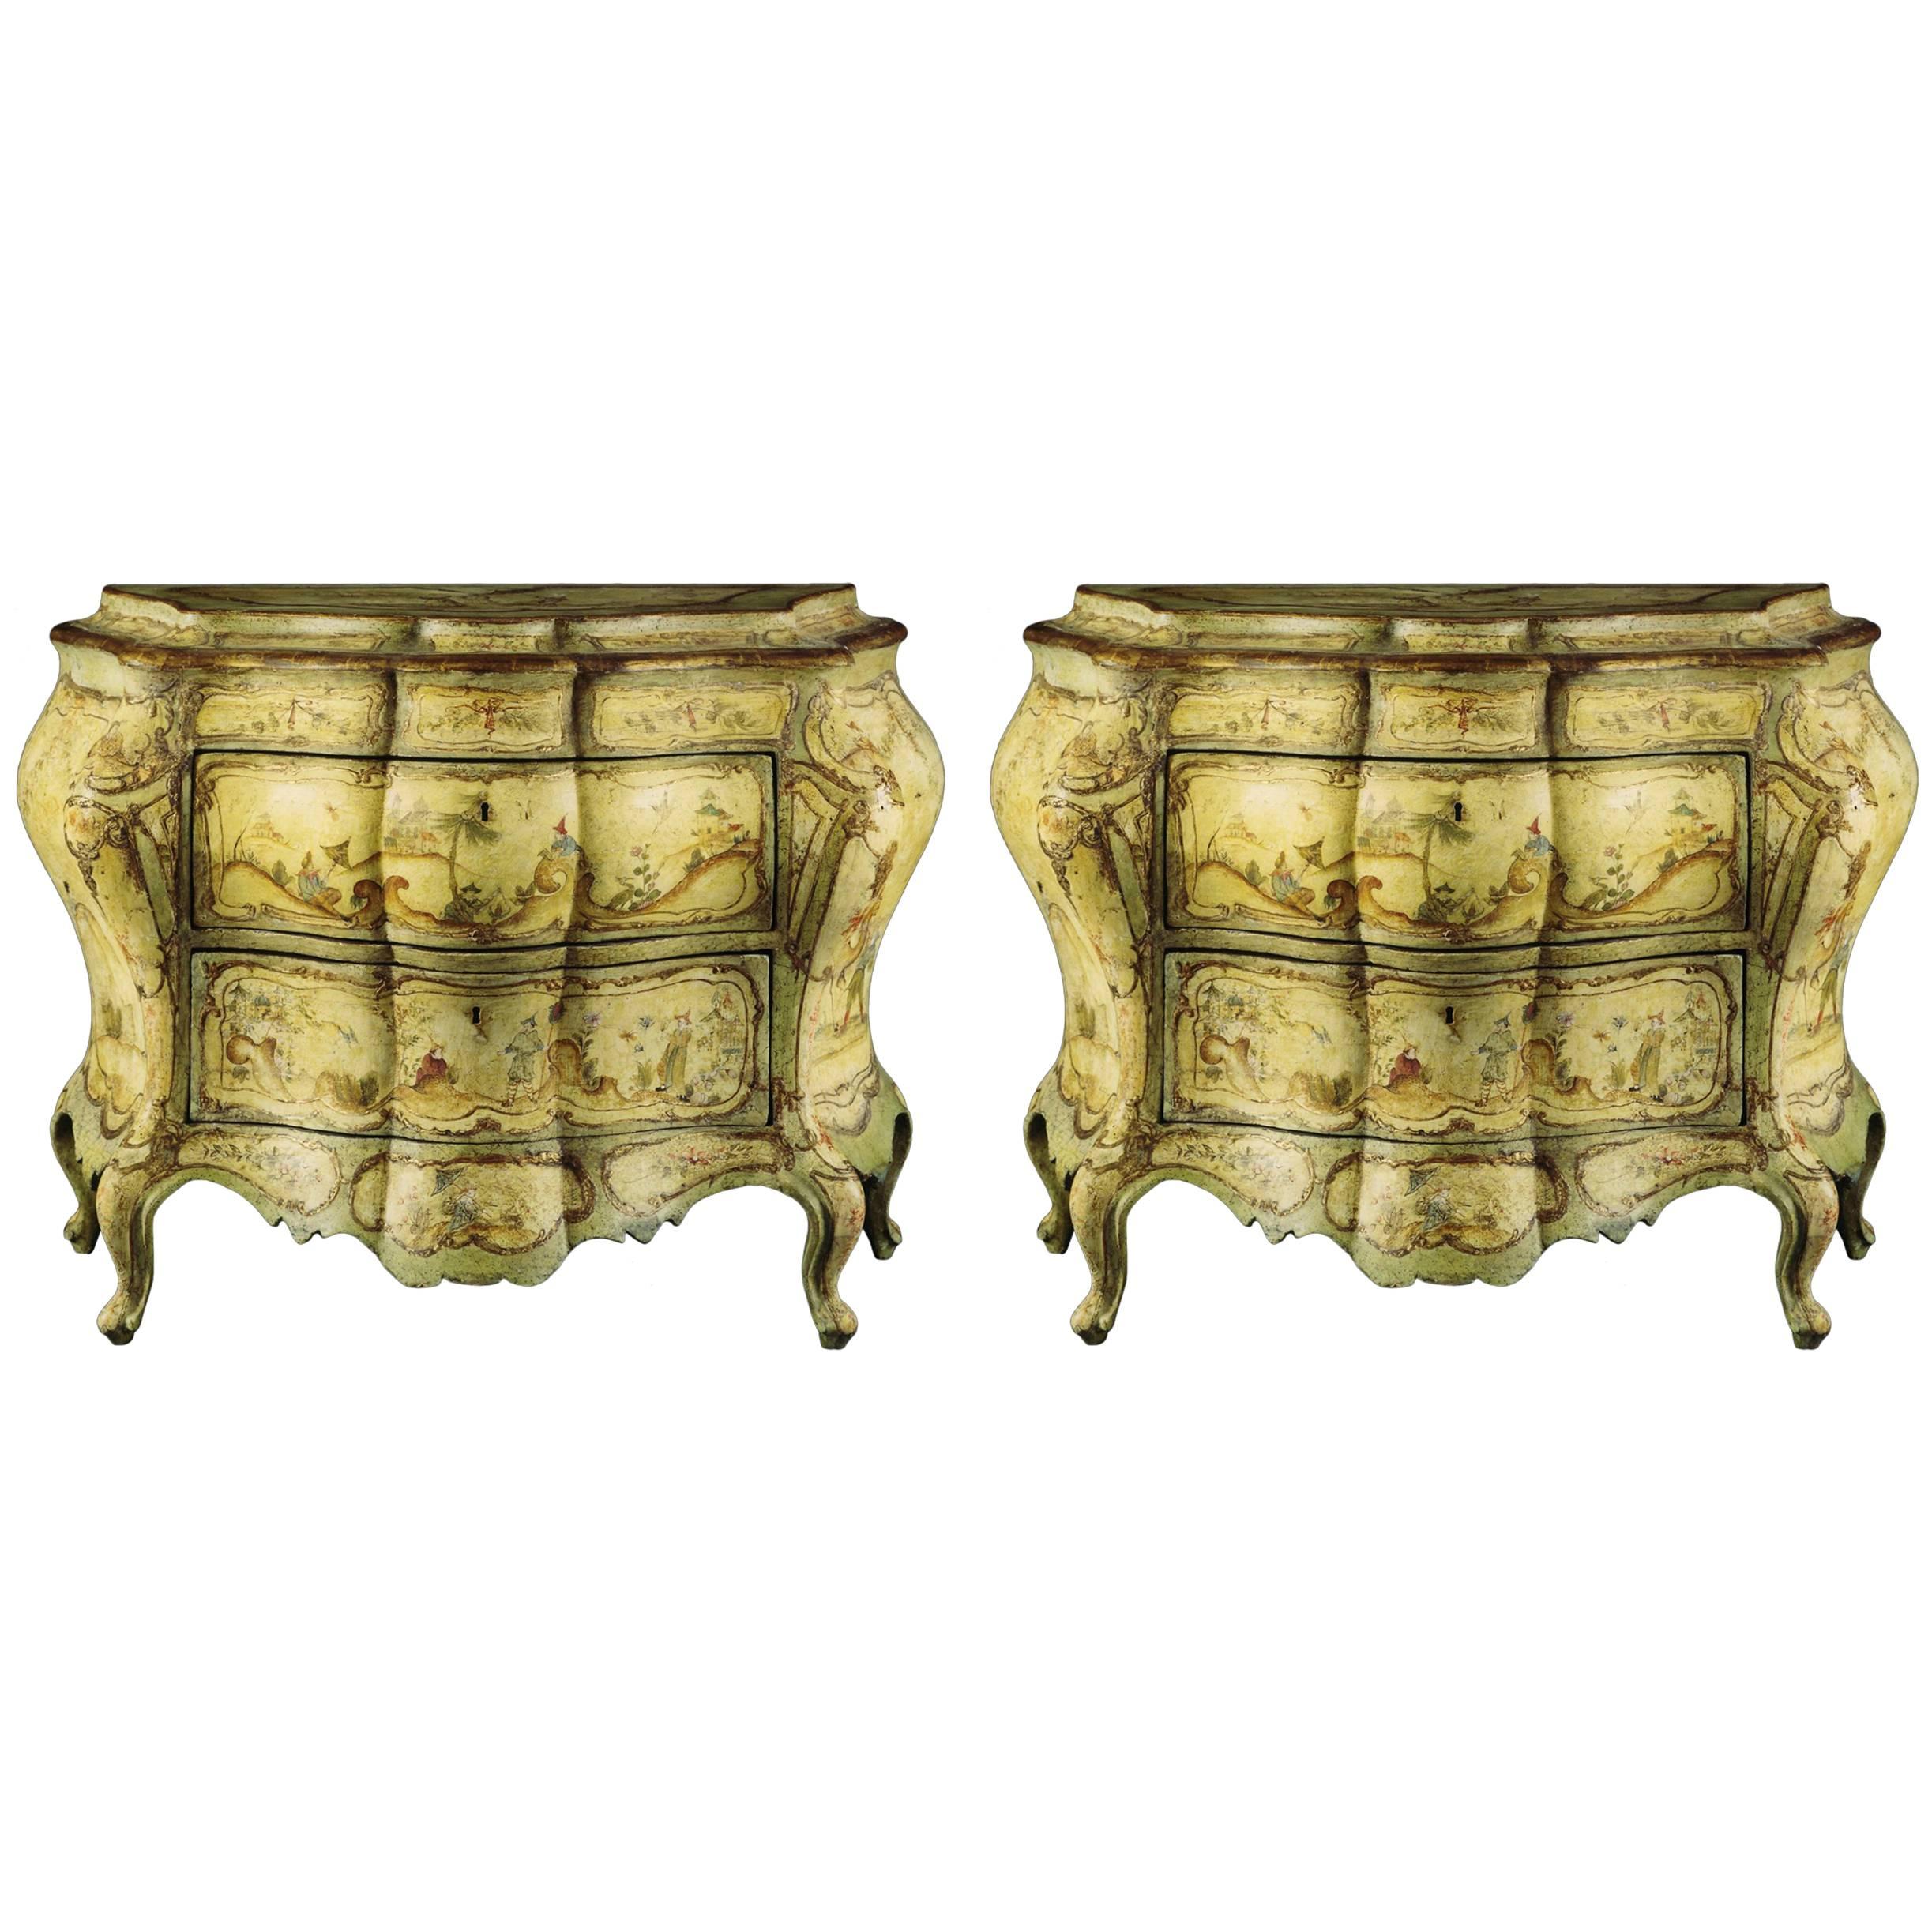 Pair of Early 19th Century Venetian Rococo Decorated Bombe Commodes